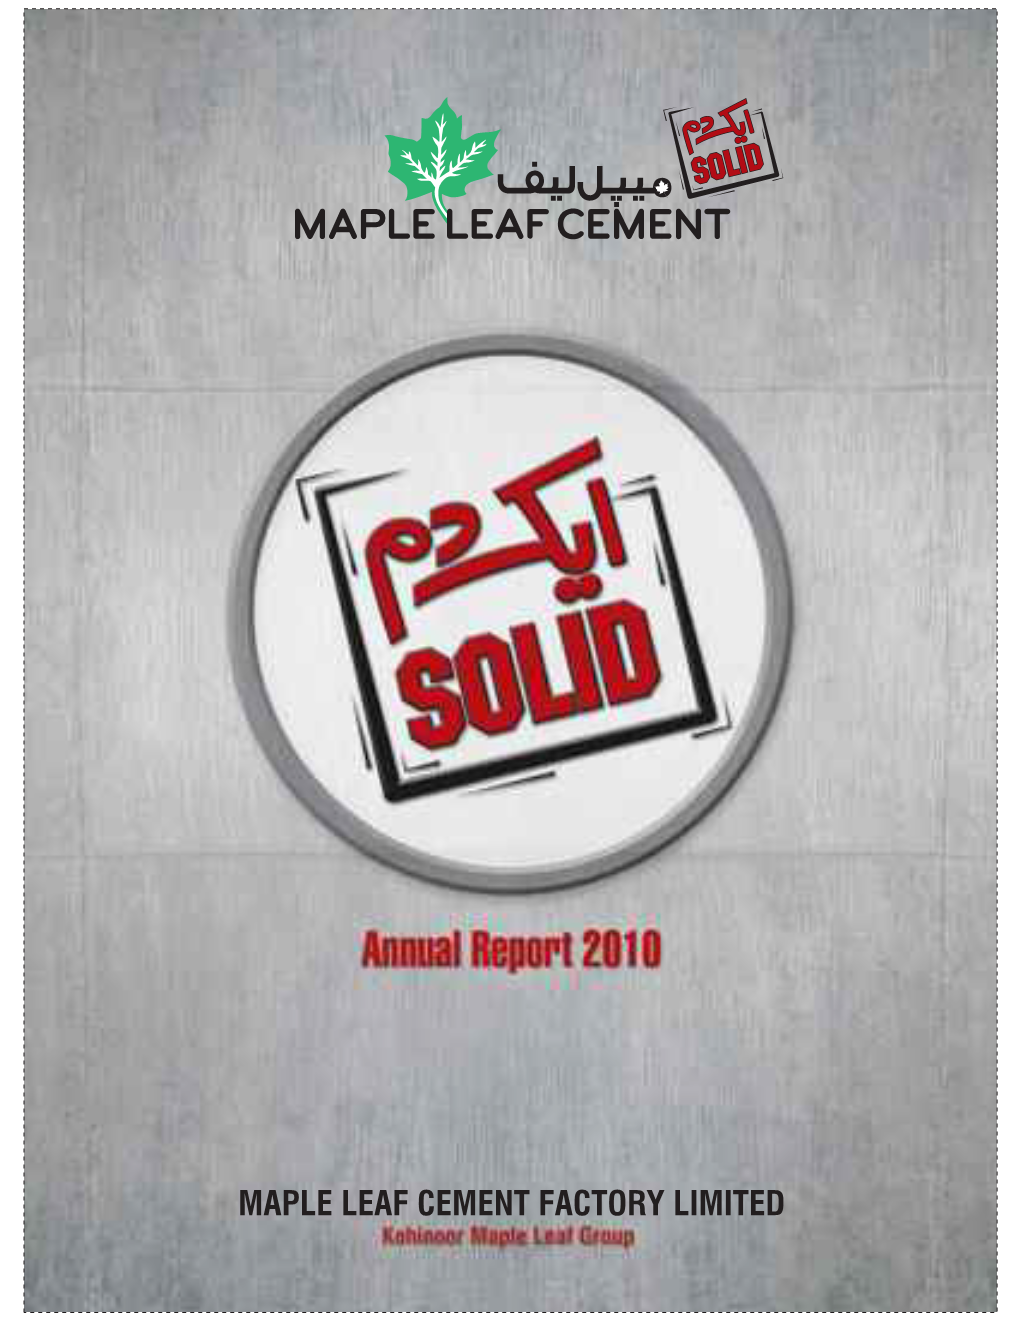 MAPLE LEAF CEMENT FACTORY LIMITED Table of Contents